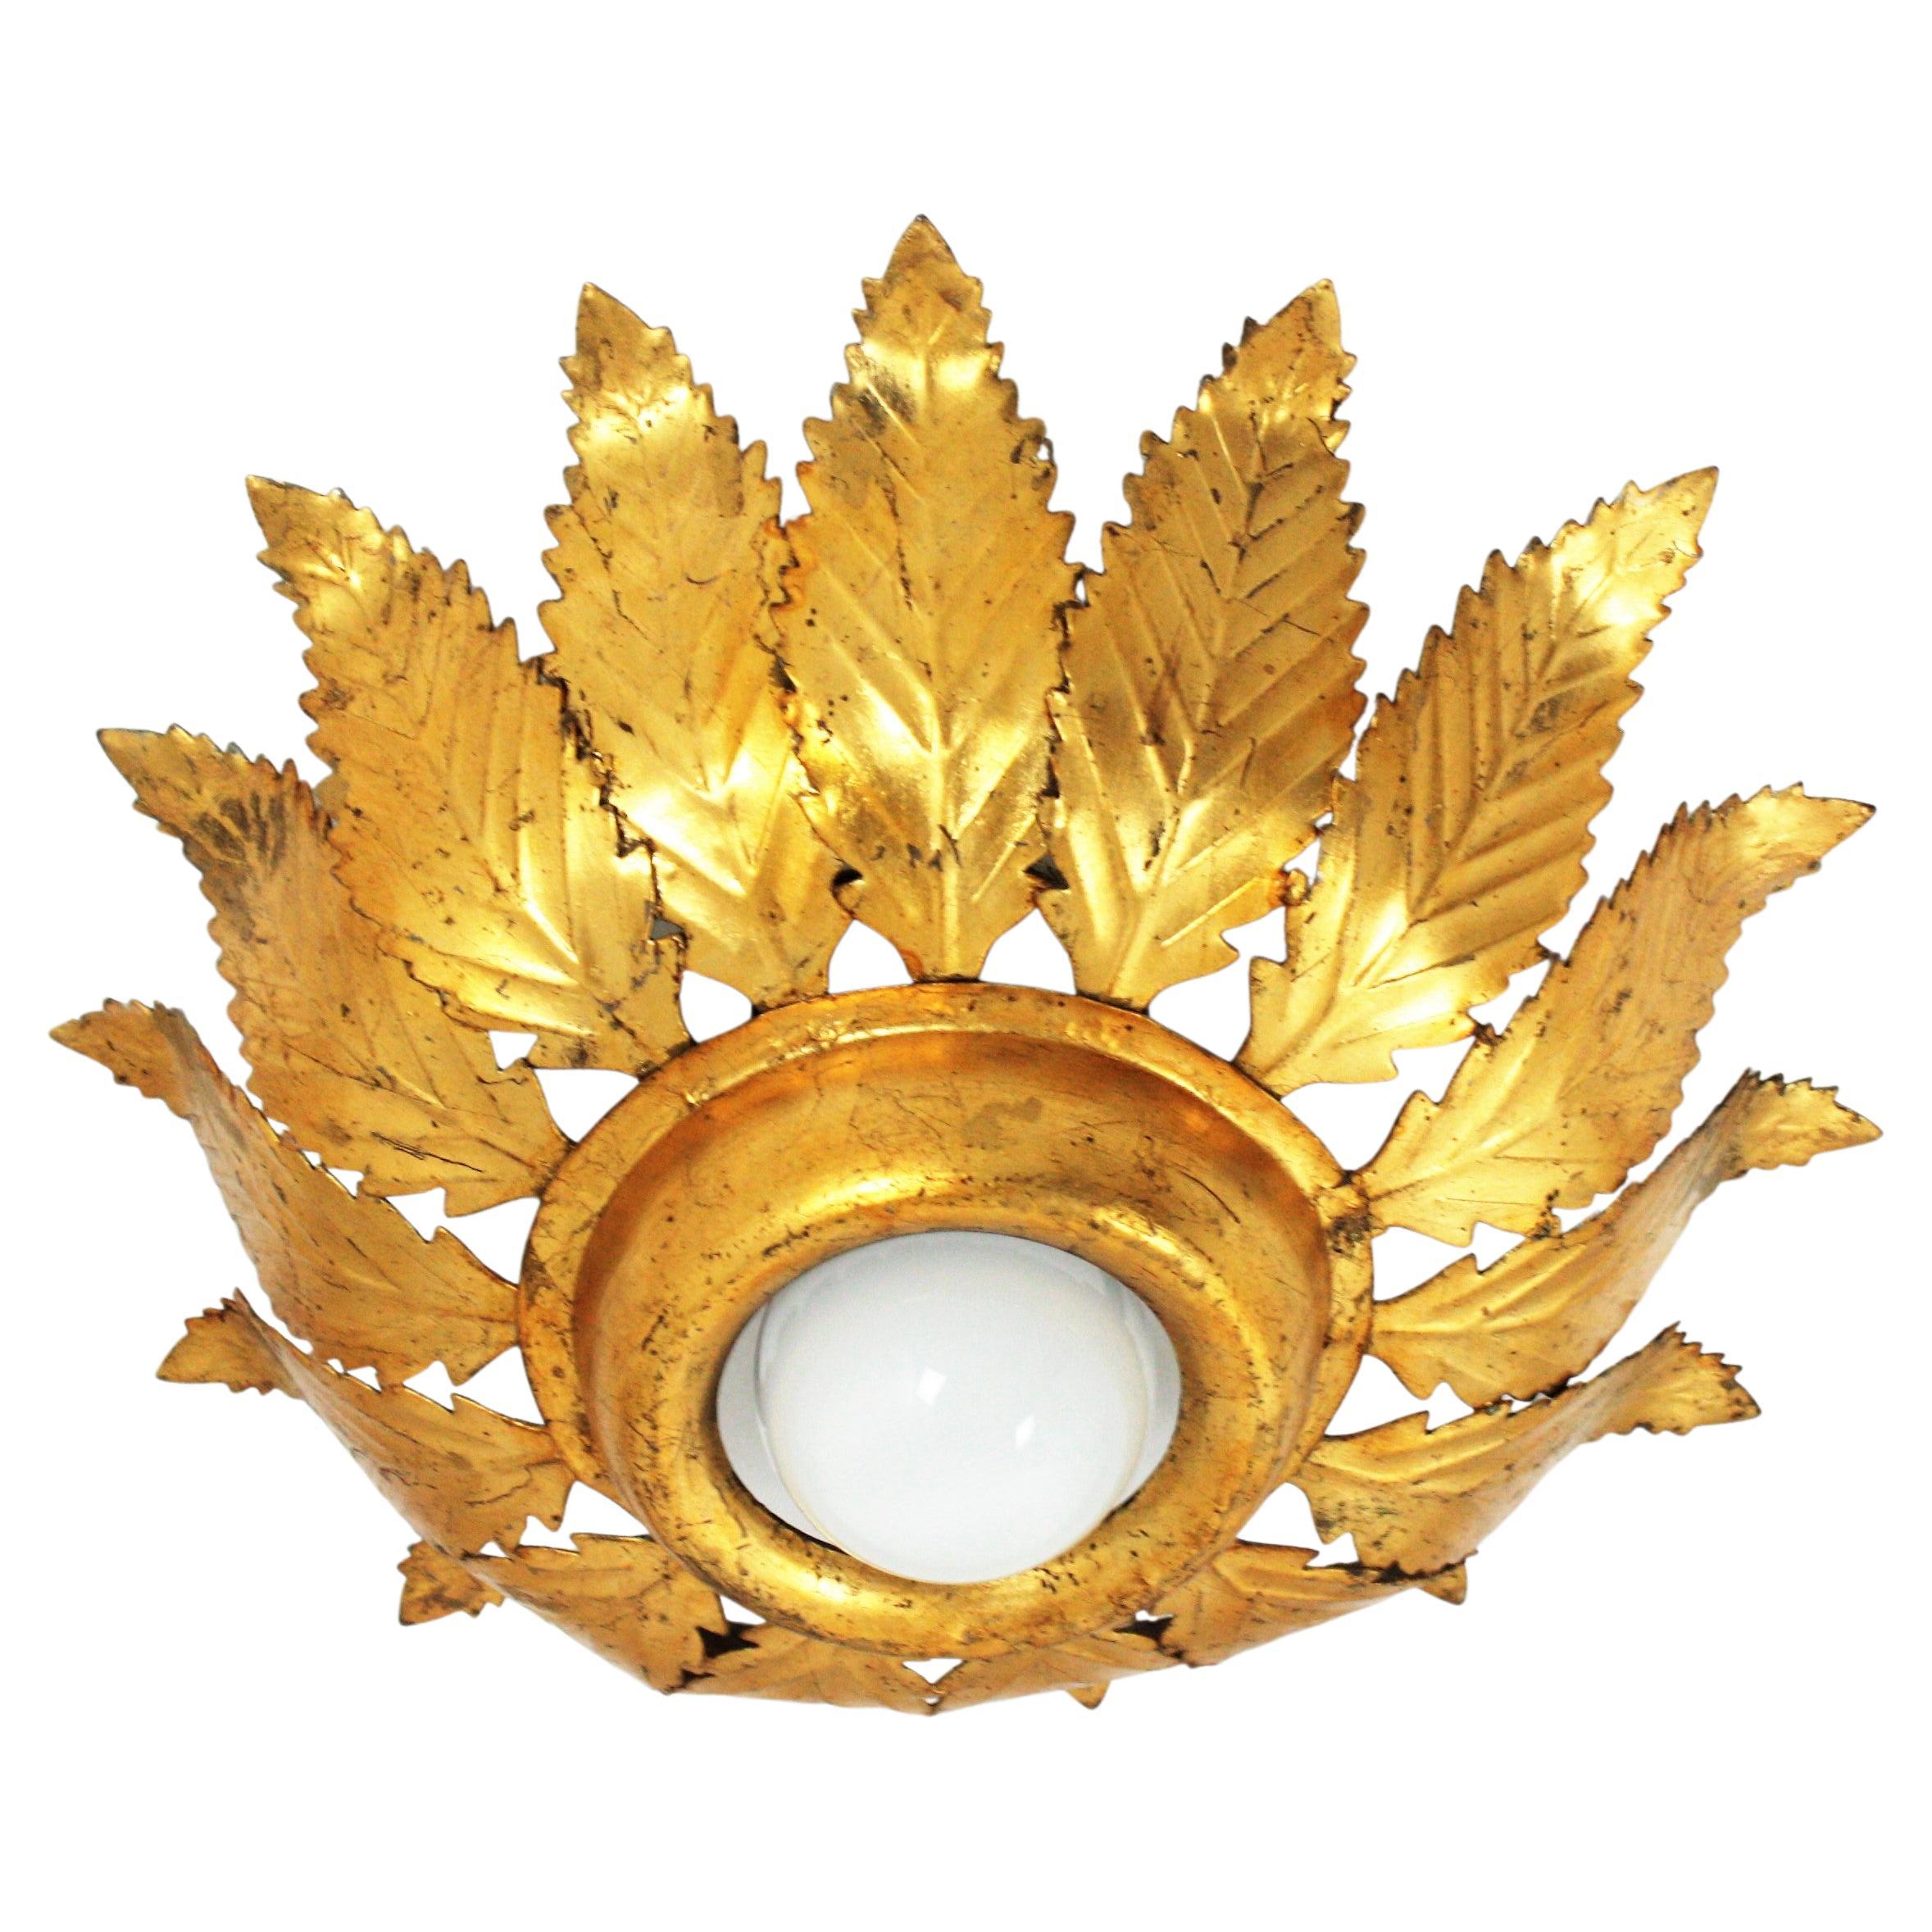 Foliage Sunburst flush mount light, iron, gold leaf, Spain, 1950s
This gorgeous spanish sunburst or crown ceiling lamp features gold leaf gilt iron leaves surrounding a central exposed bulb. It has a nice patina showing its original gold leaf